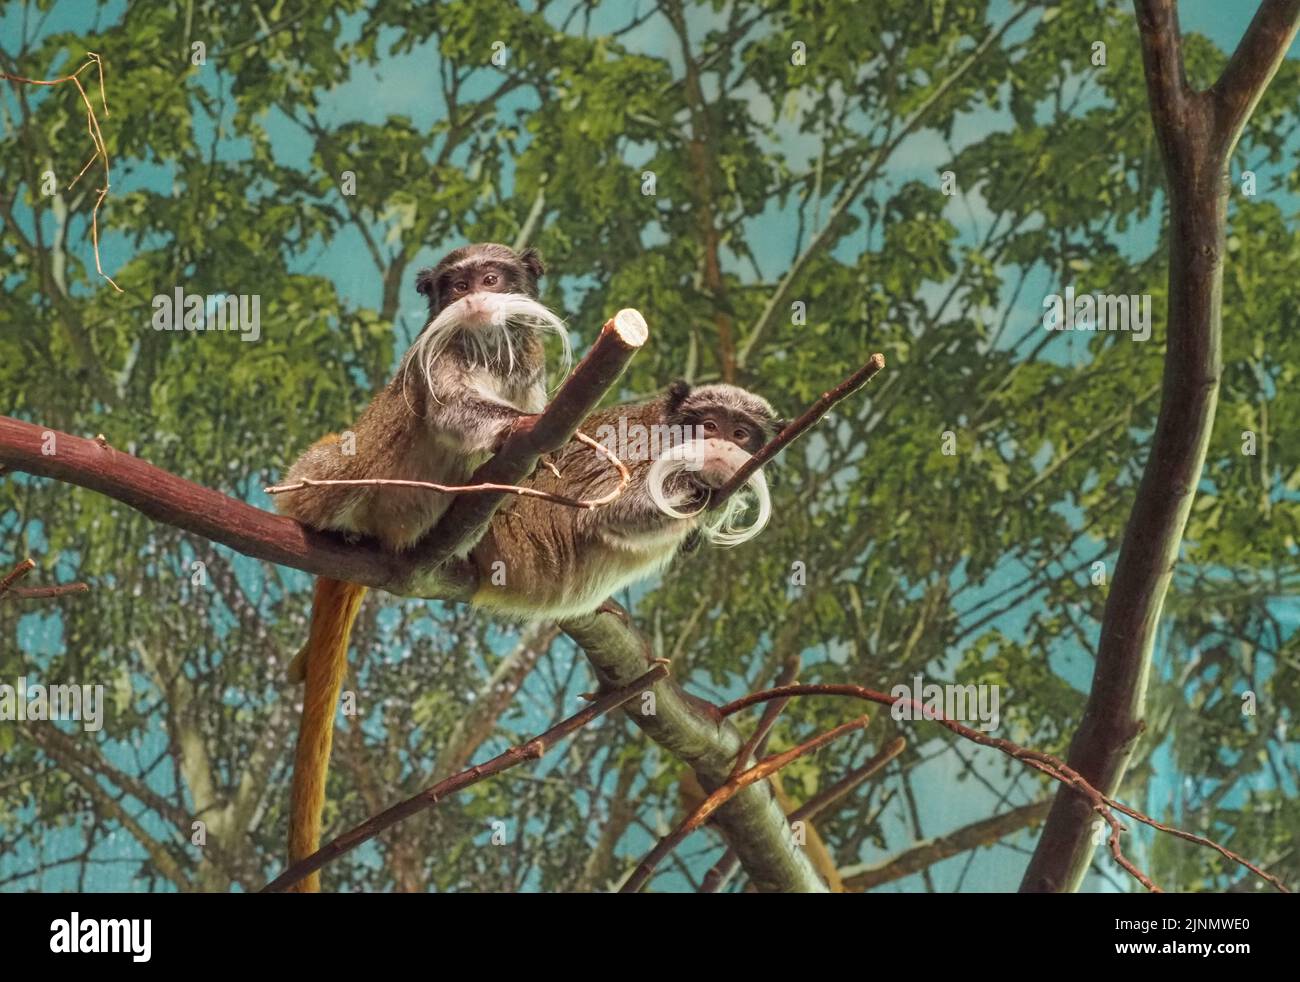 Two Imperial tamarins perched on a tree at the Salzburg Zoo Stock Photo